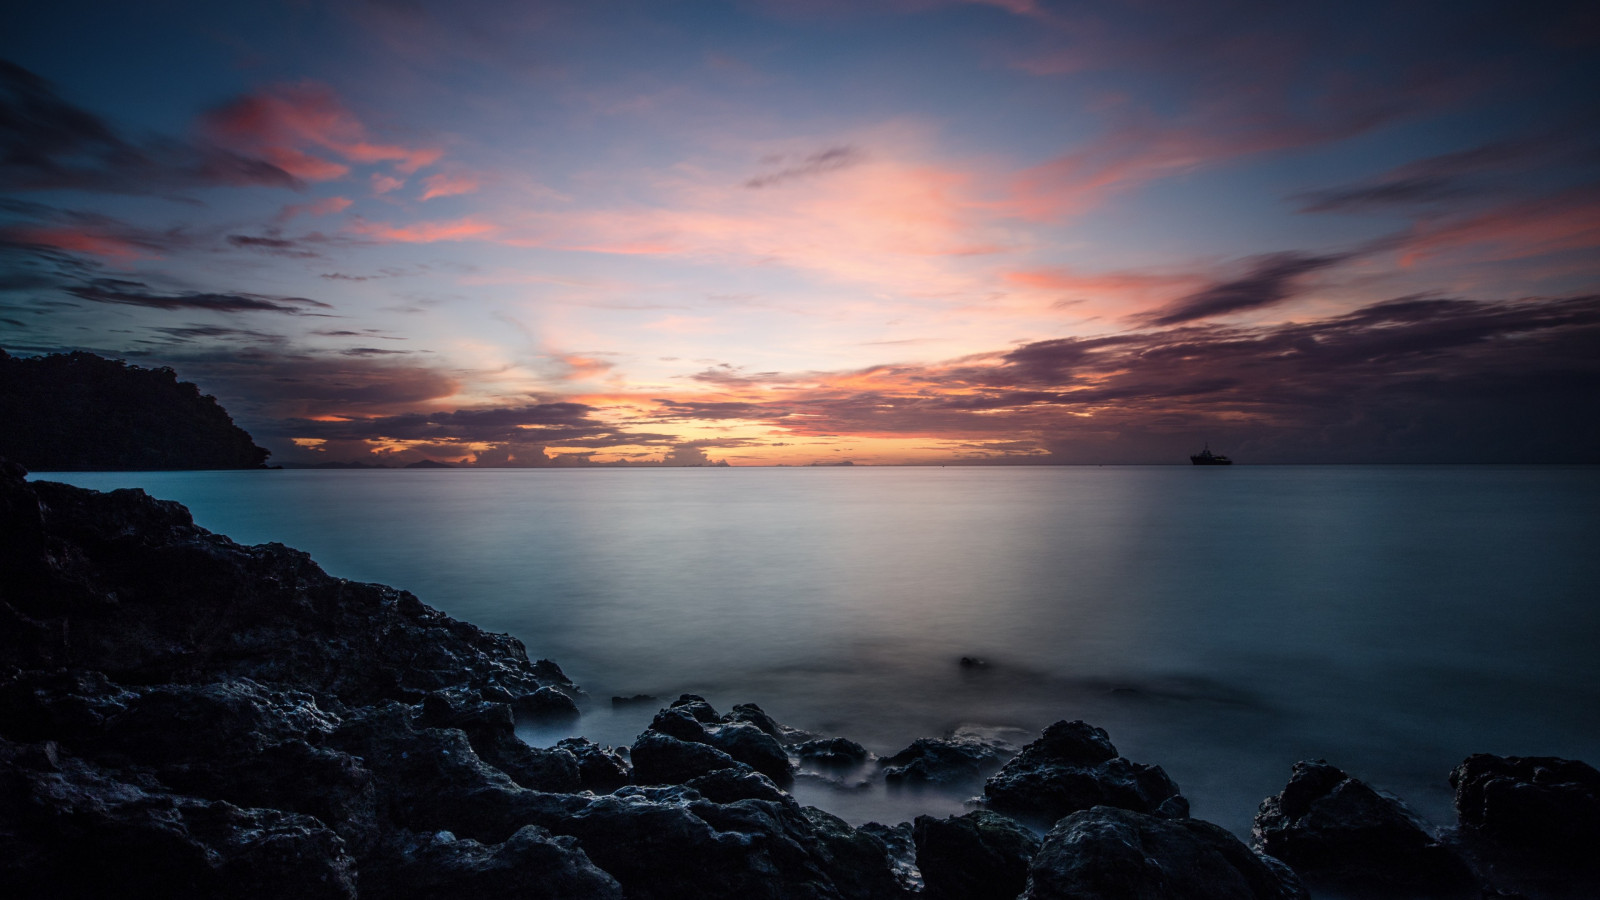 Sunset, rocks, clouds, view from Thailand wallpaper 1600x900